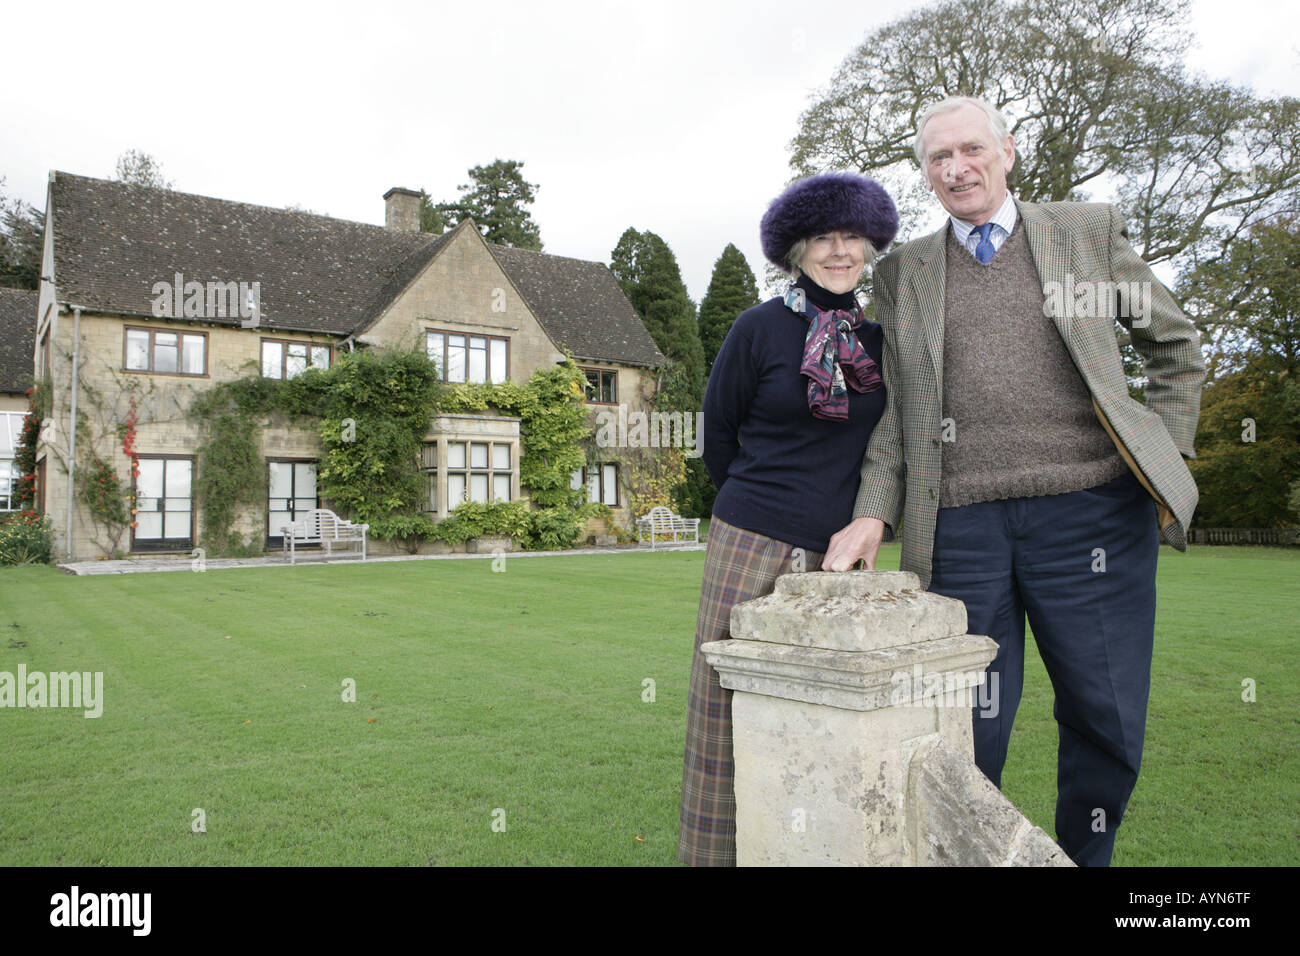 Sir Henry and Lady Carolyn Elwes  at Colesborne  Park one of  the  greatest snowdrop garden in England. Stock Photo